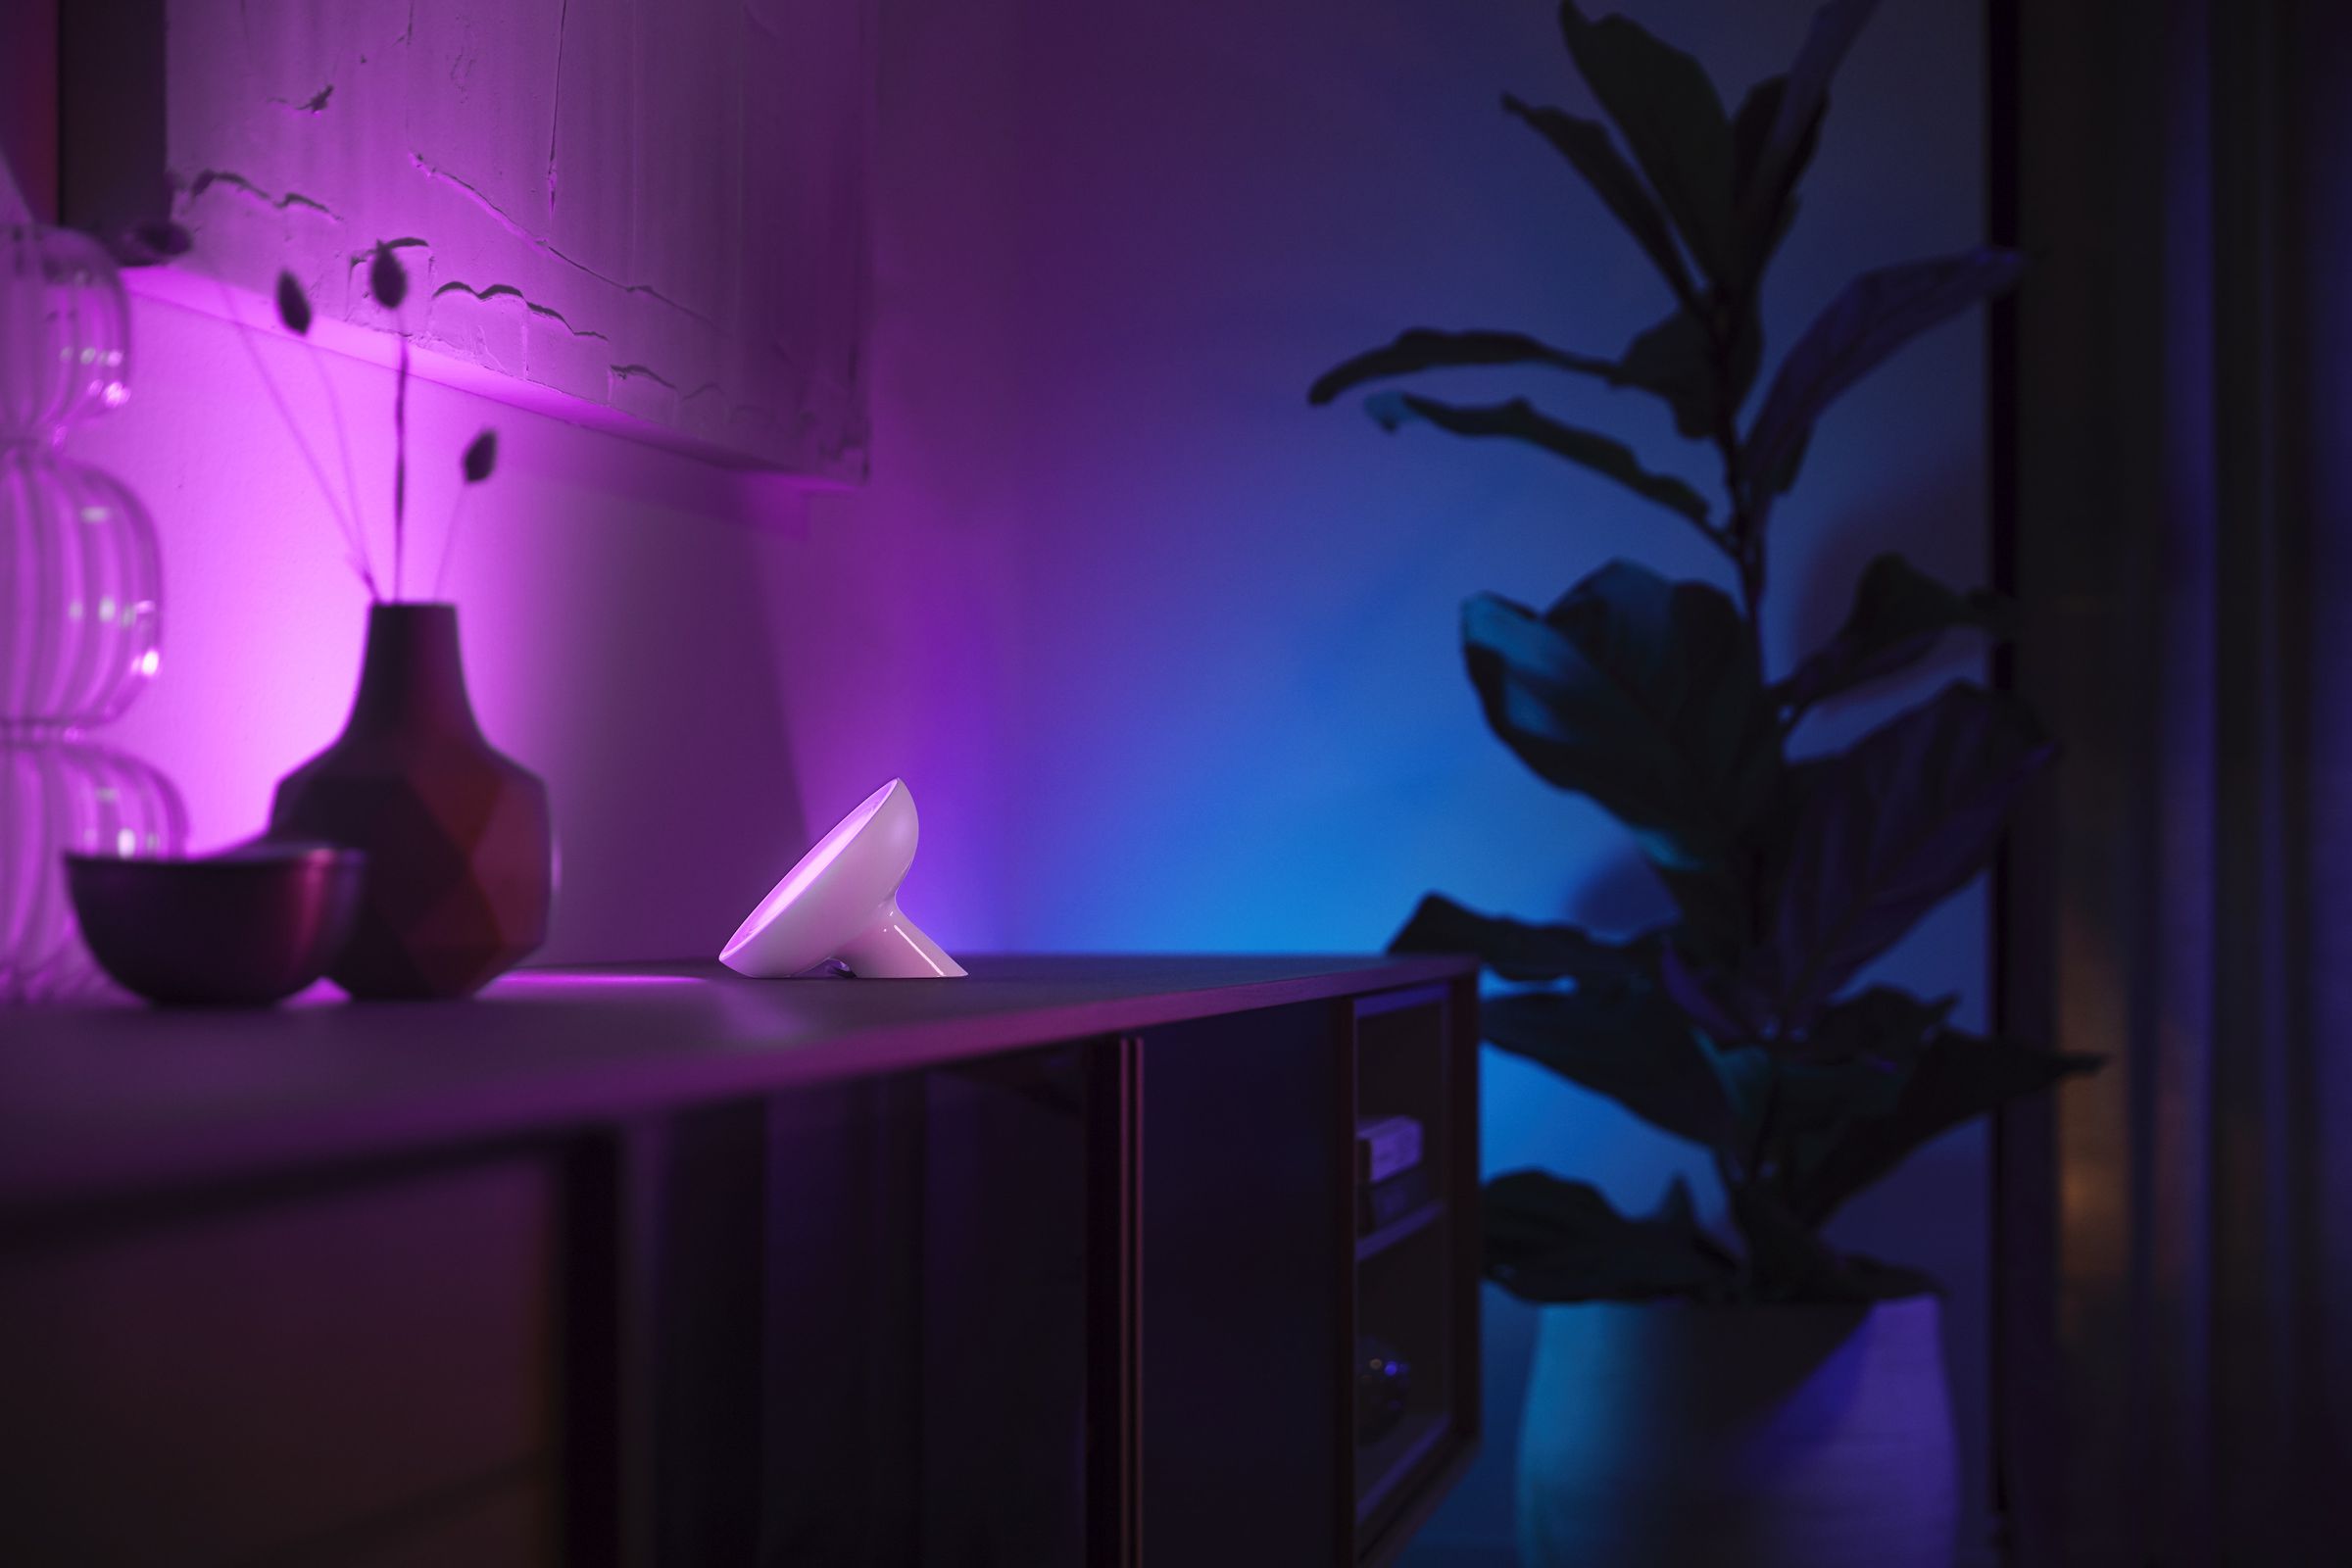 The Philips Hue Bloom